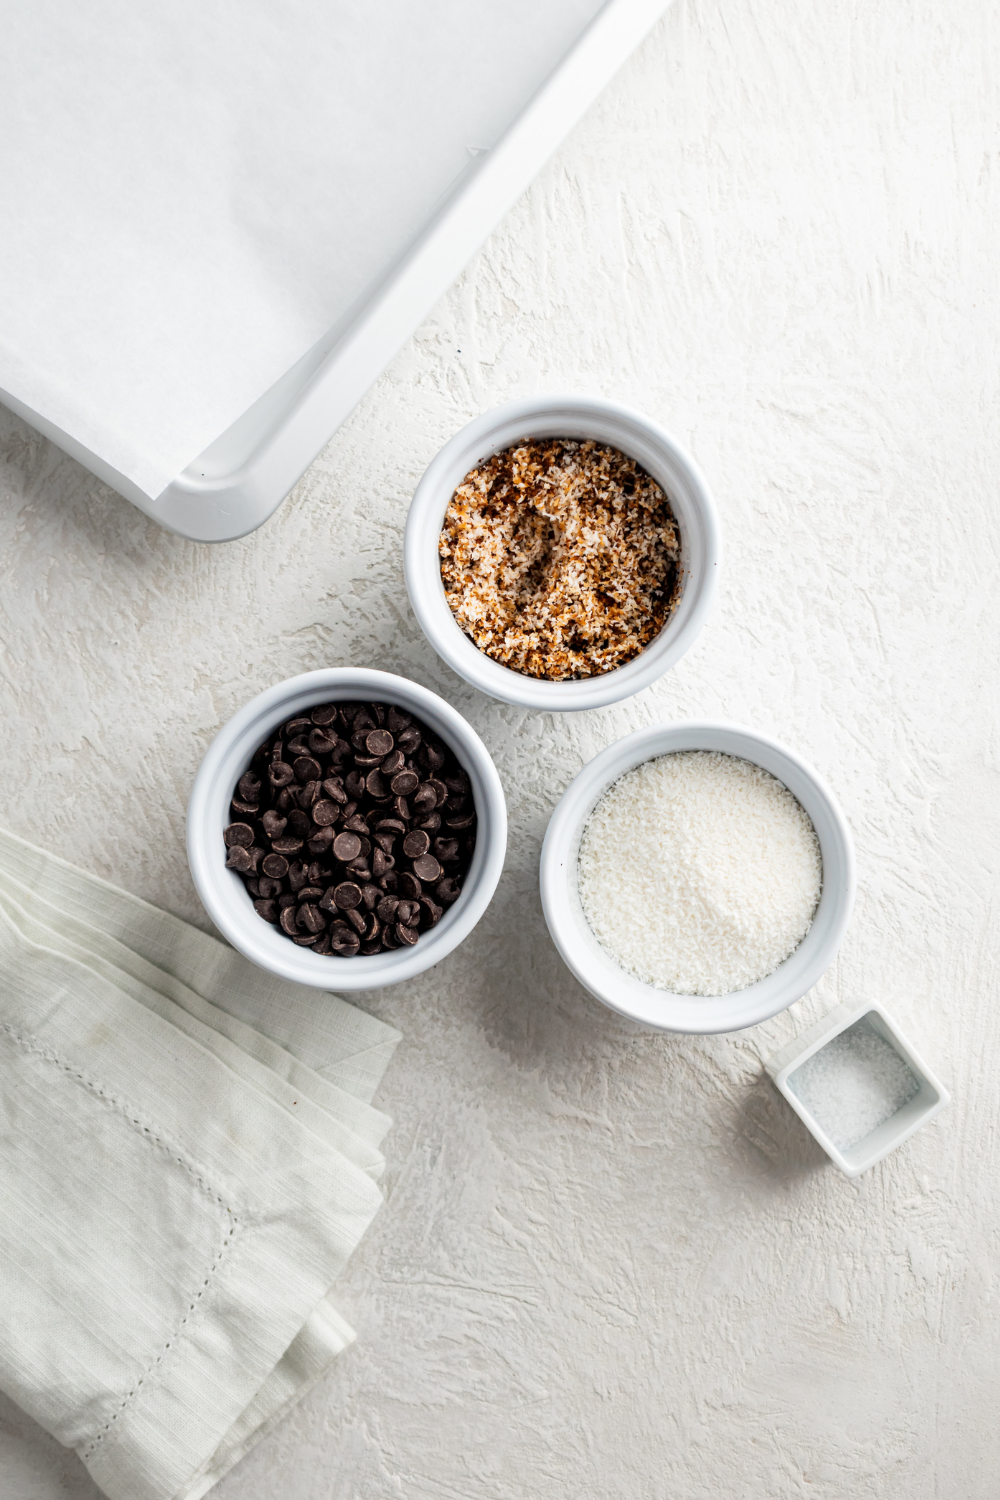 A bowl of chocolate chips, a bowl of coconut flakes, a bowl of toasted coconut flakes, and a bowl of sea salt all on a white counter.